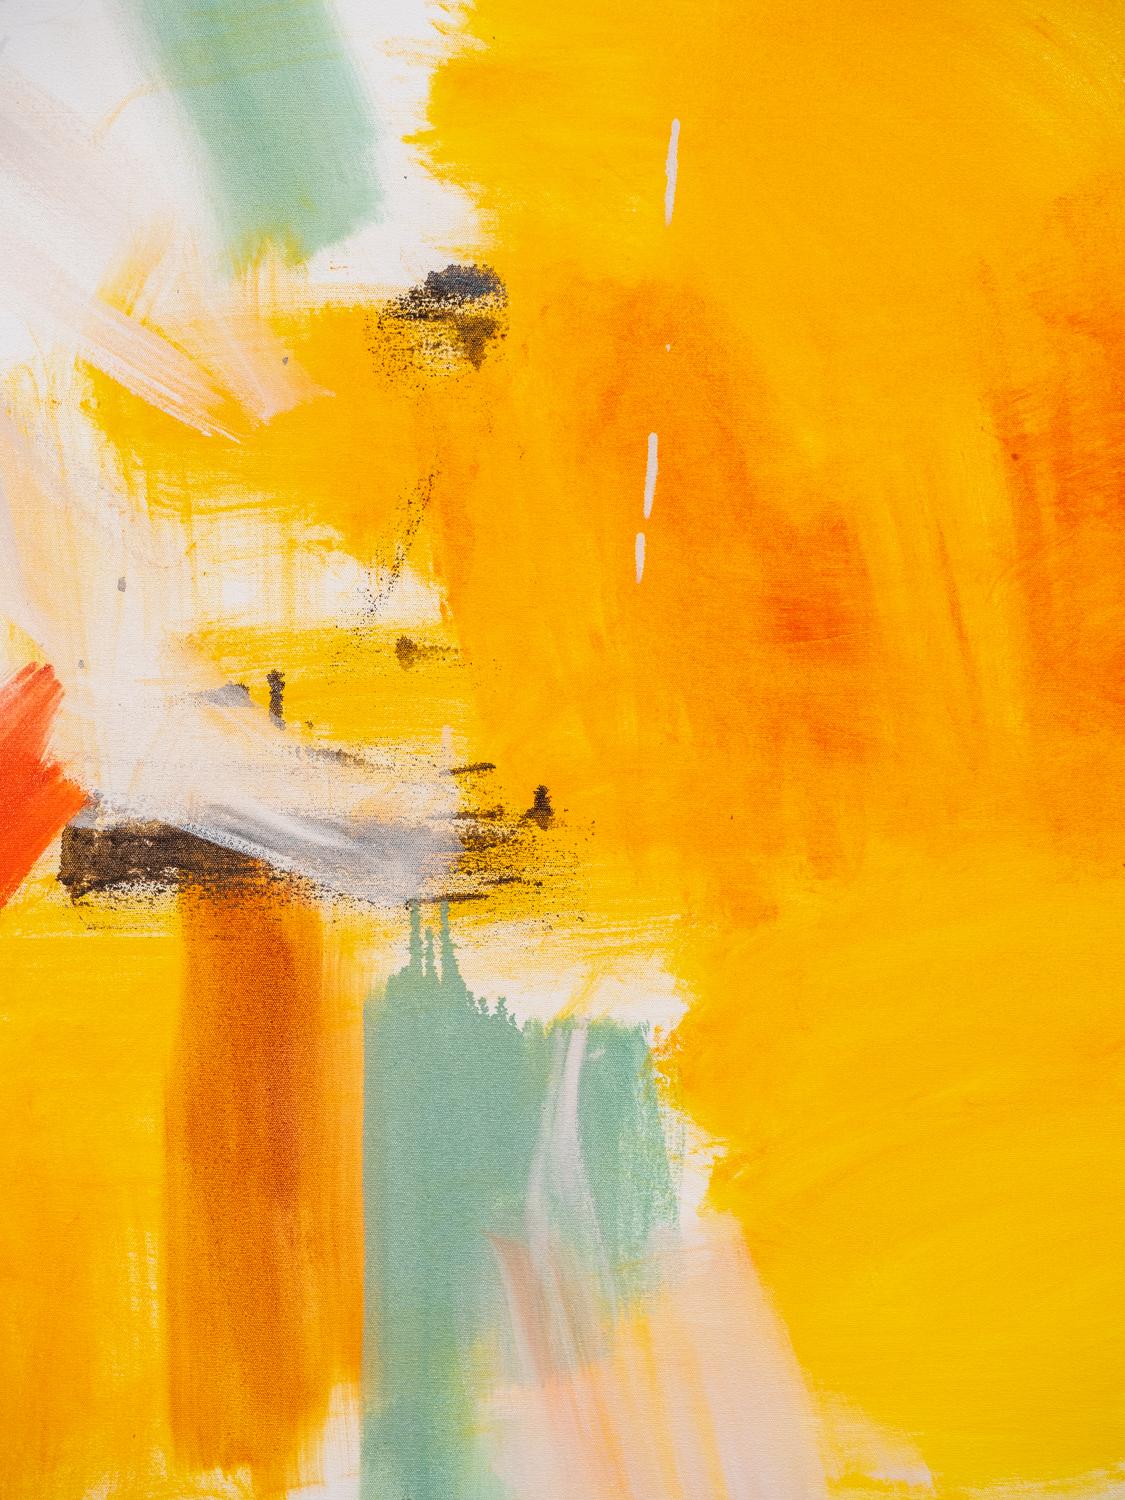 That Time - large, warm, vibrant, colourful, gestural abstract, oil on canvas - Contemporary Painting by Scott Pattinson